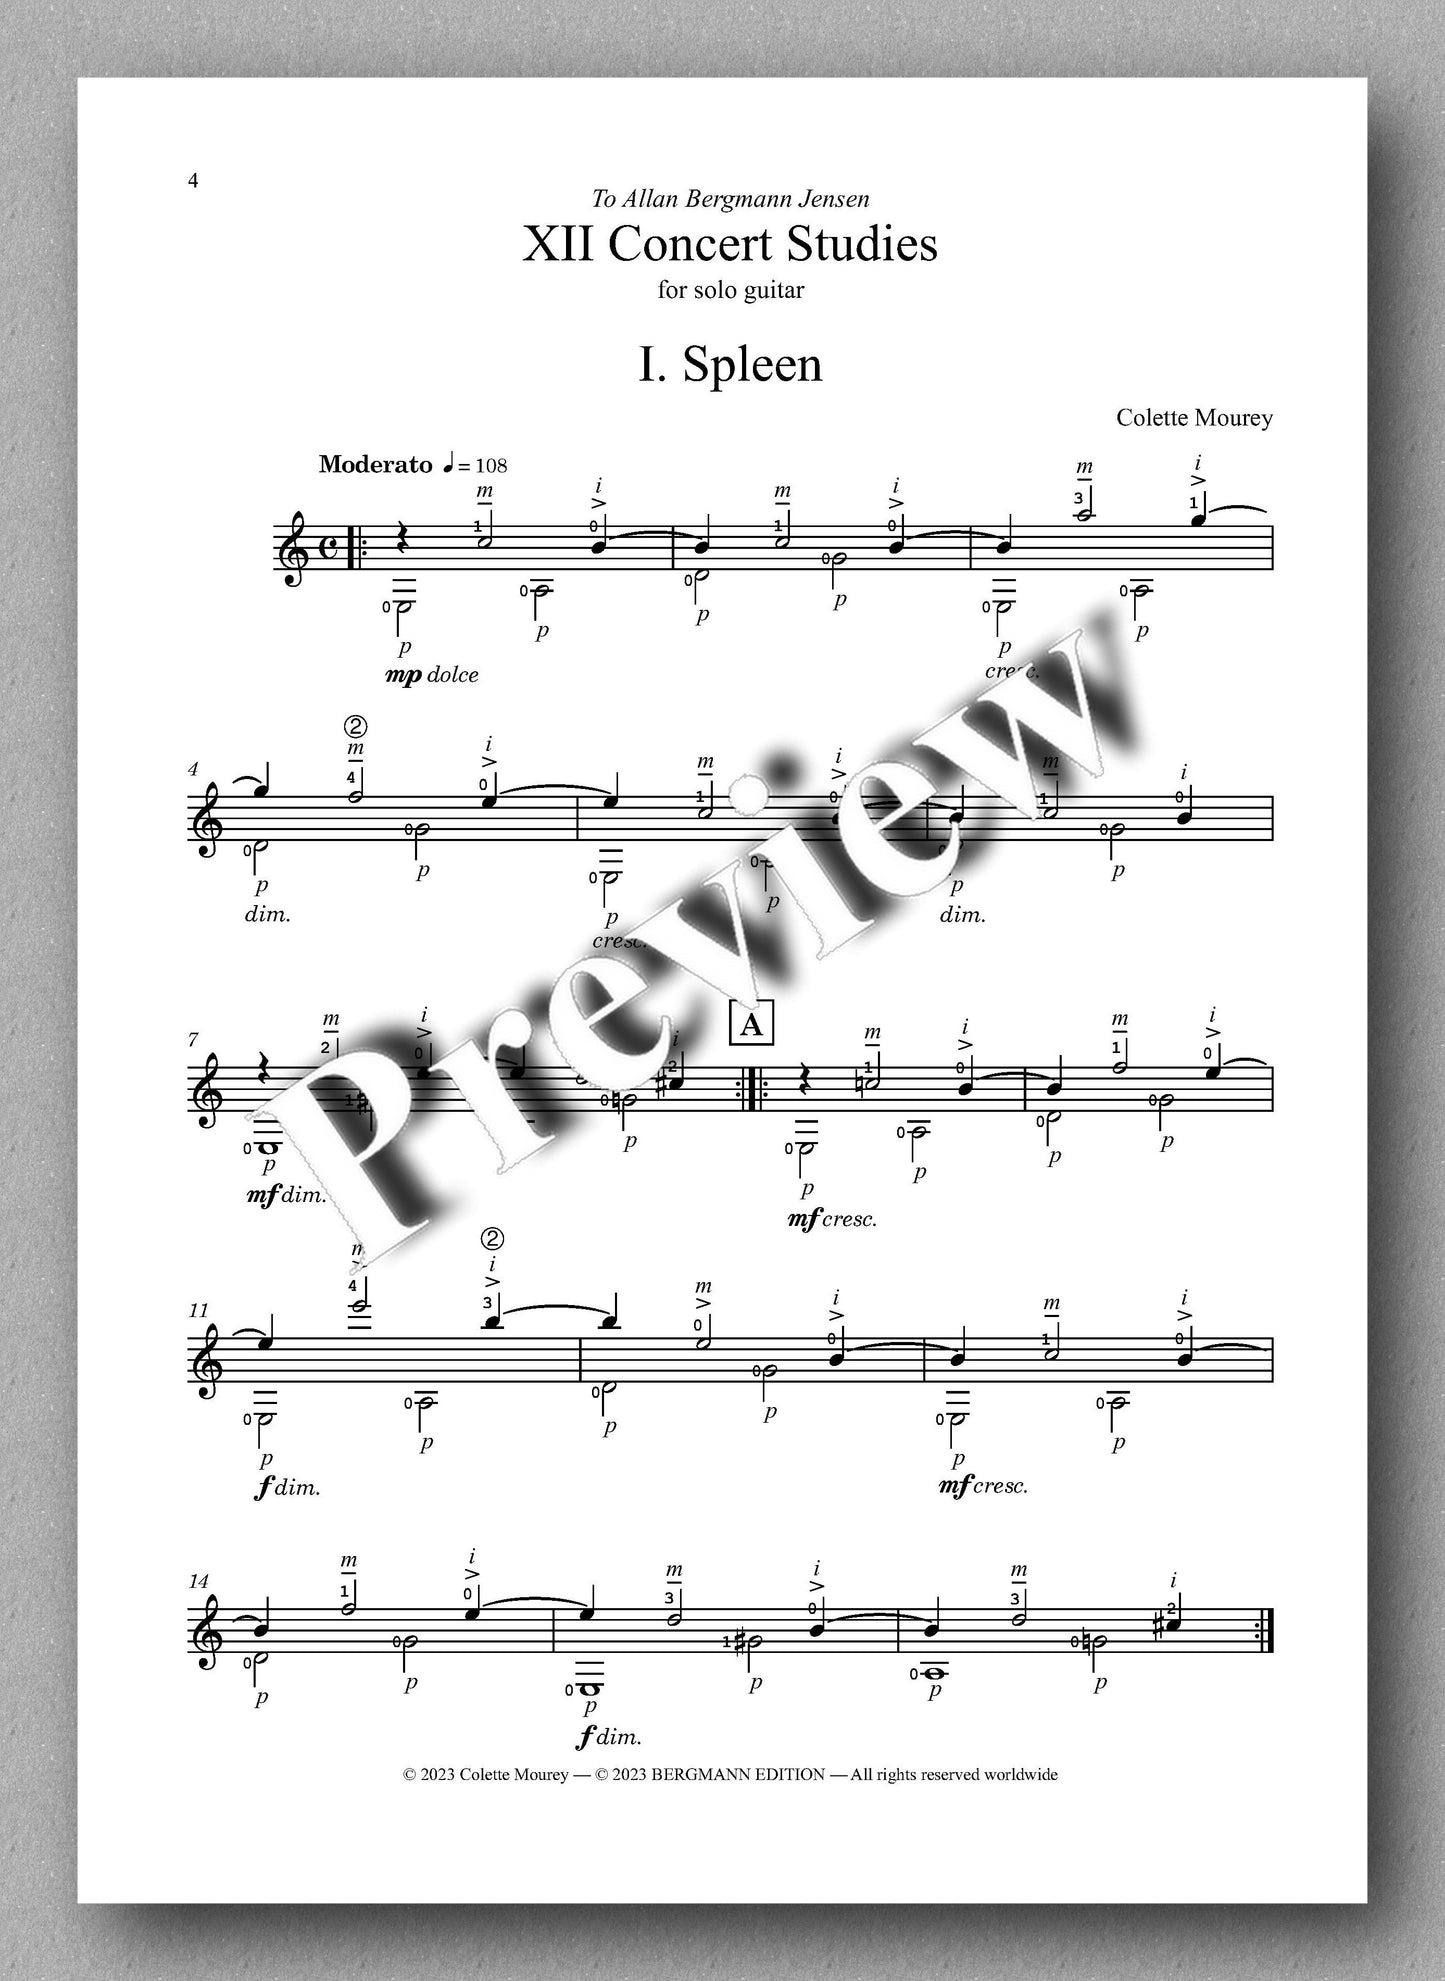 Colette Mourey, XII Concert Studies - preview of the music score 1